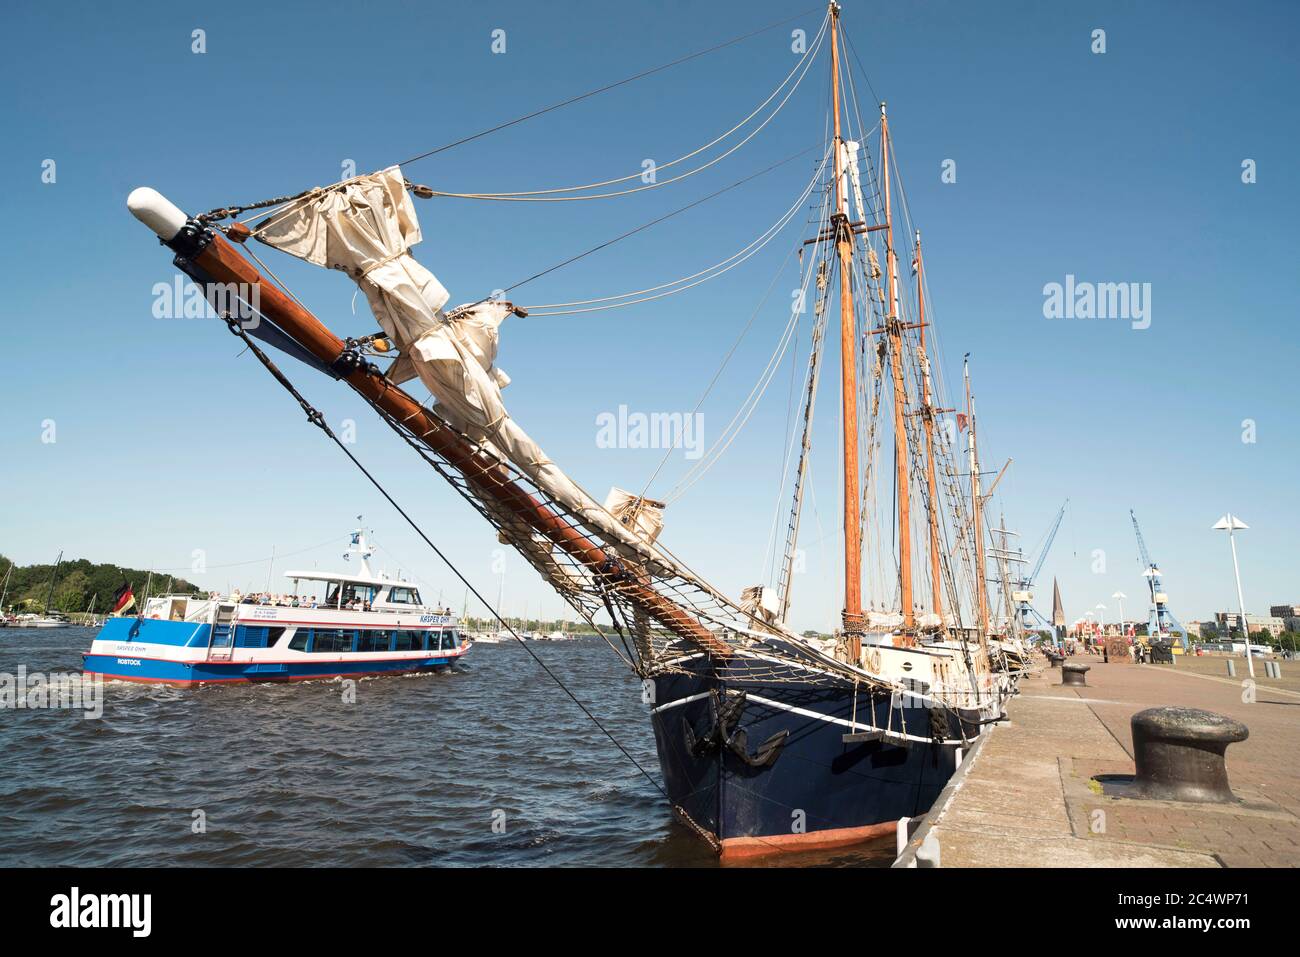 Rostock, Germany. 14th June, 2020. A passenger ship is sailing on the Warnow from the city harbour of the Hanseatic city of Rostock, in the foreground a tall ship at the quay. Credit: Nordlicht Rostock/dpa-Zentralbild/ZB/dpa/Alamy Live News Stock Photo